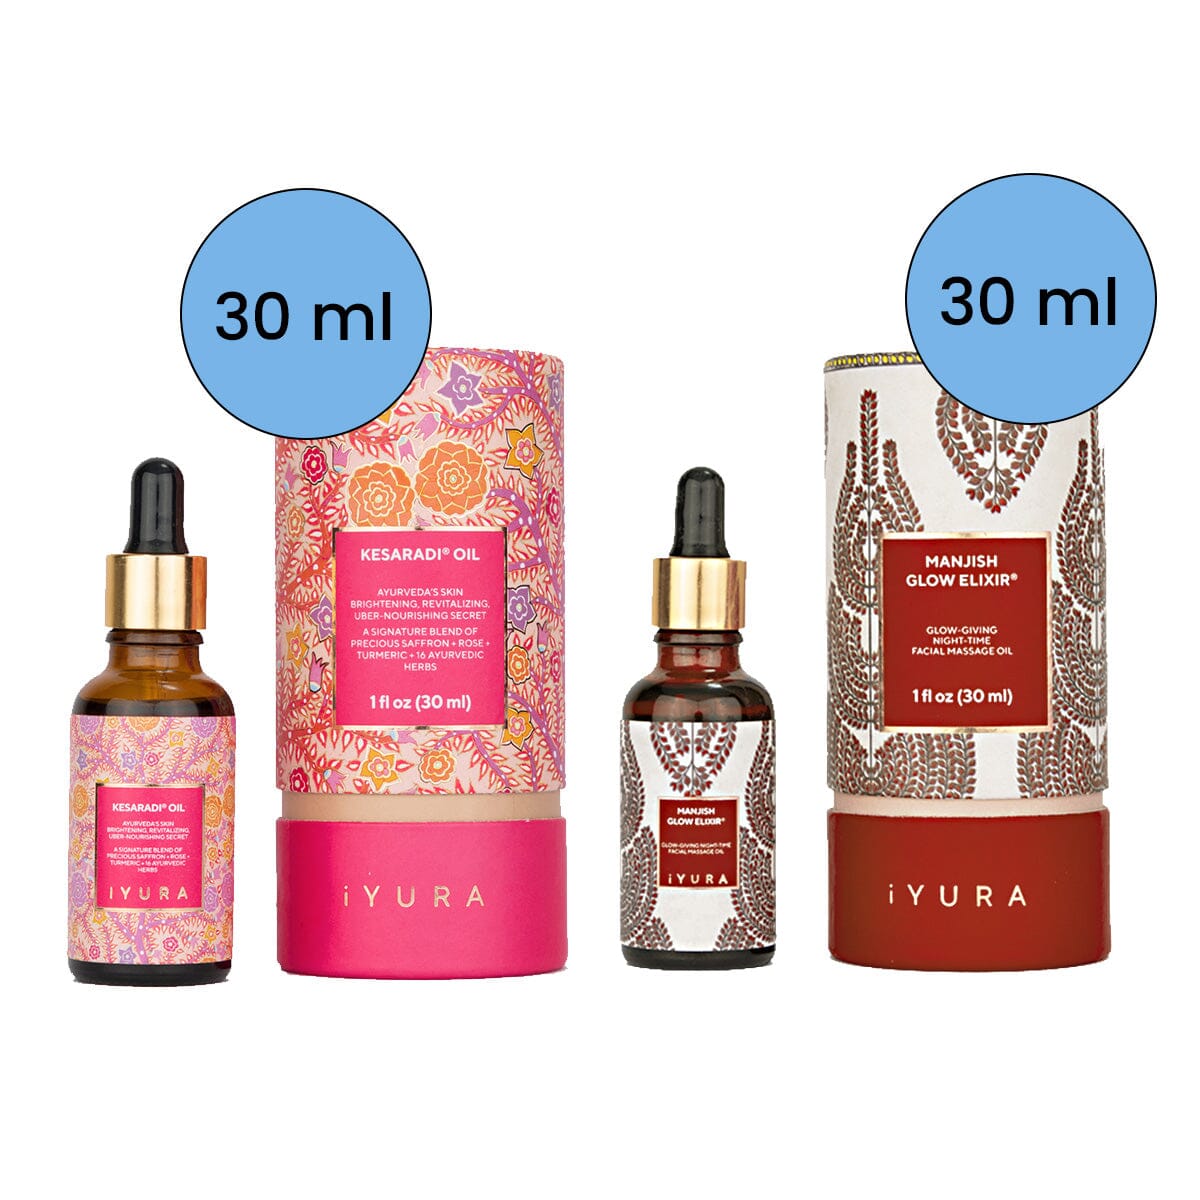 Day & Night Face Oil Duo - Best Moisturizer for Healthy Skin - Pick Your Size Beauty set iYURA 